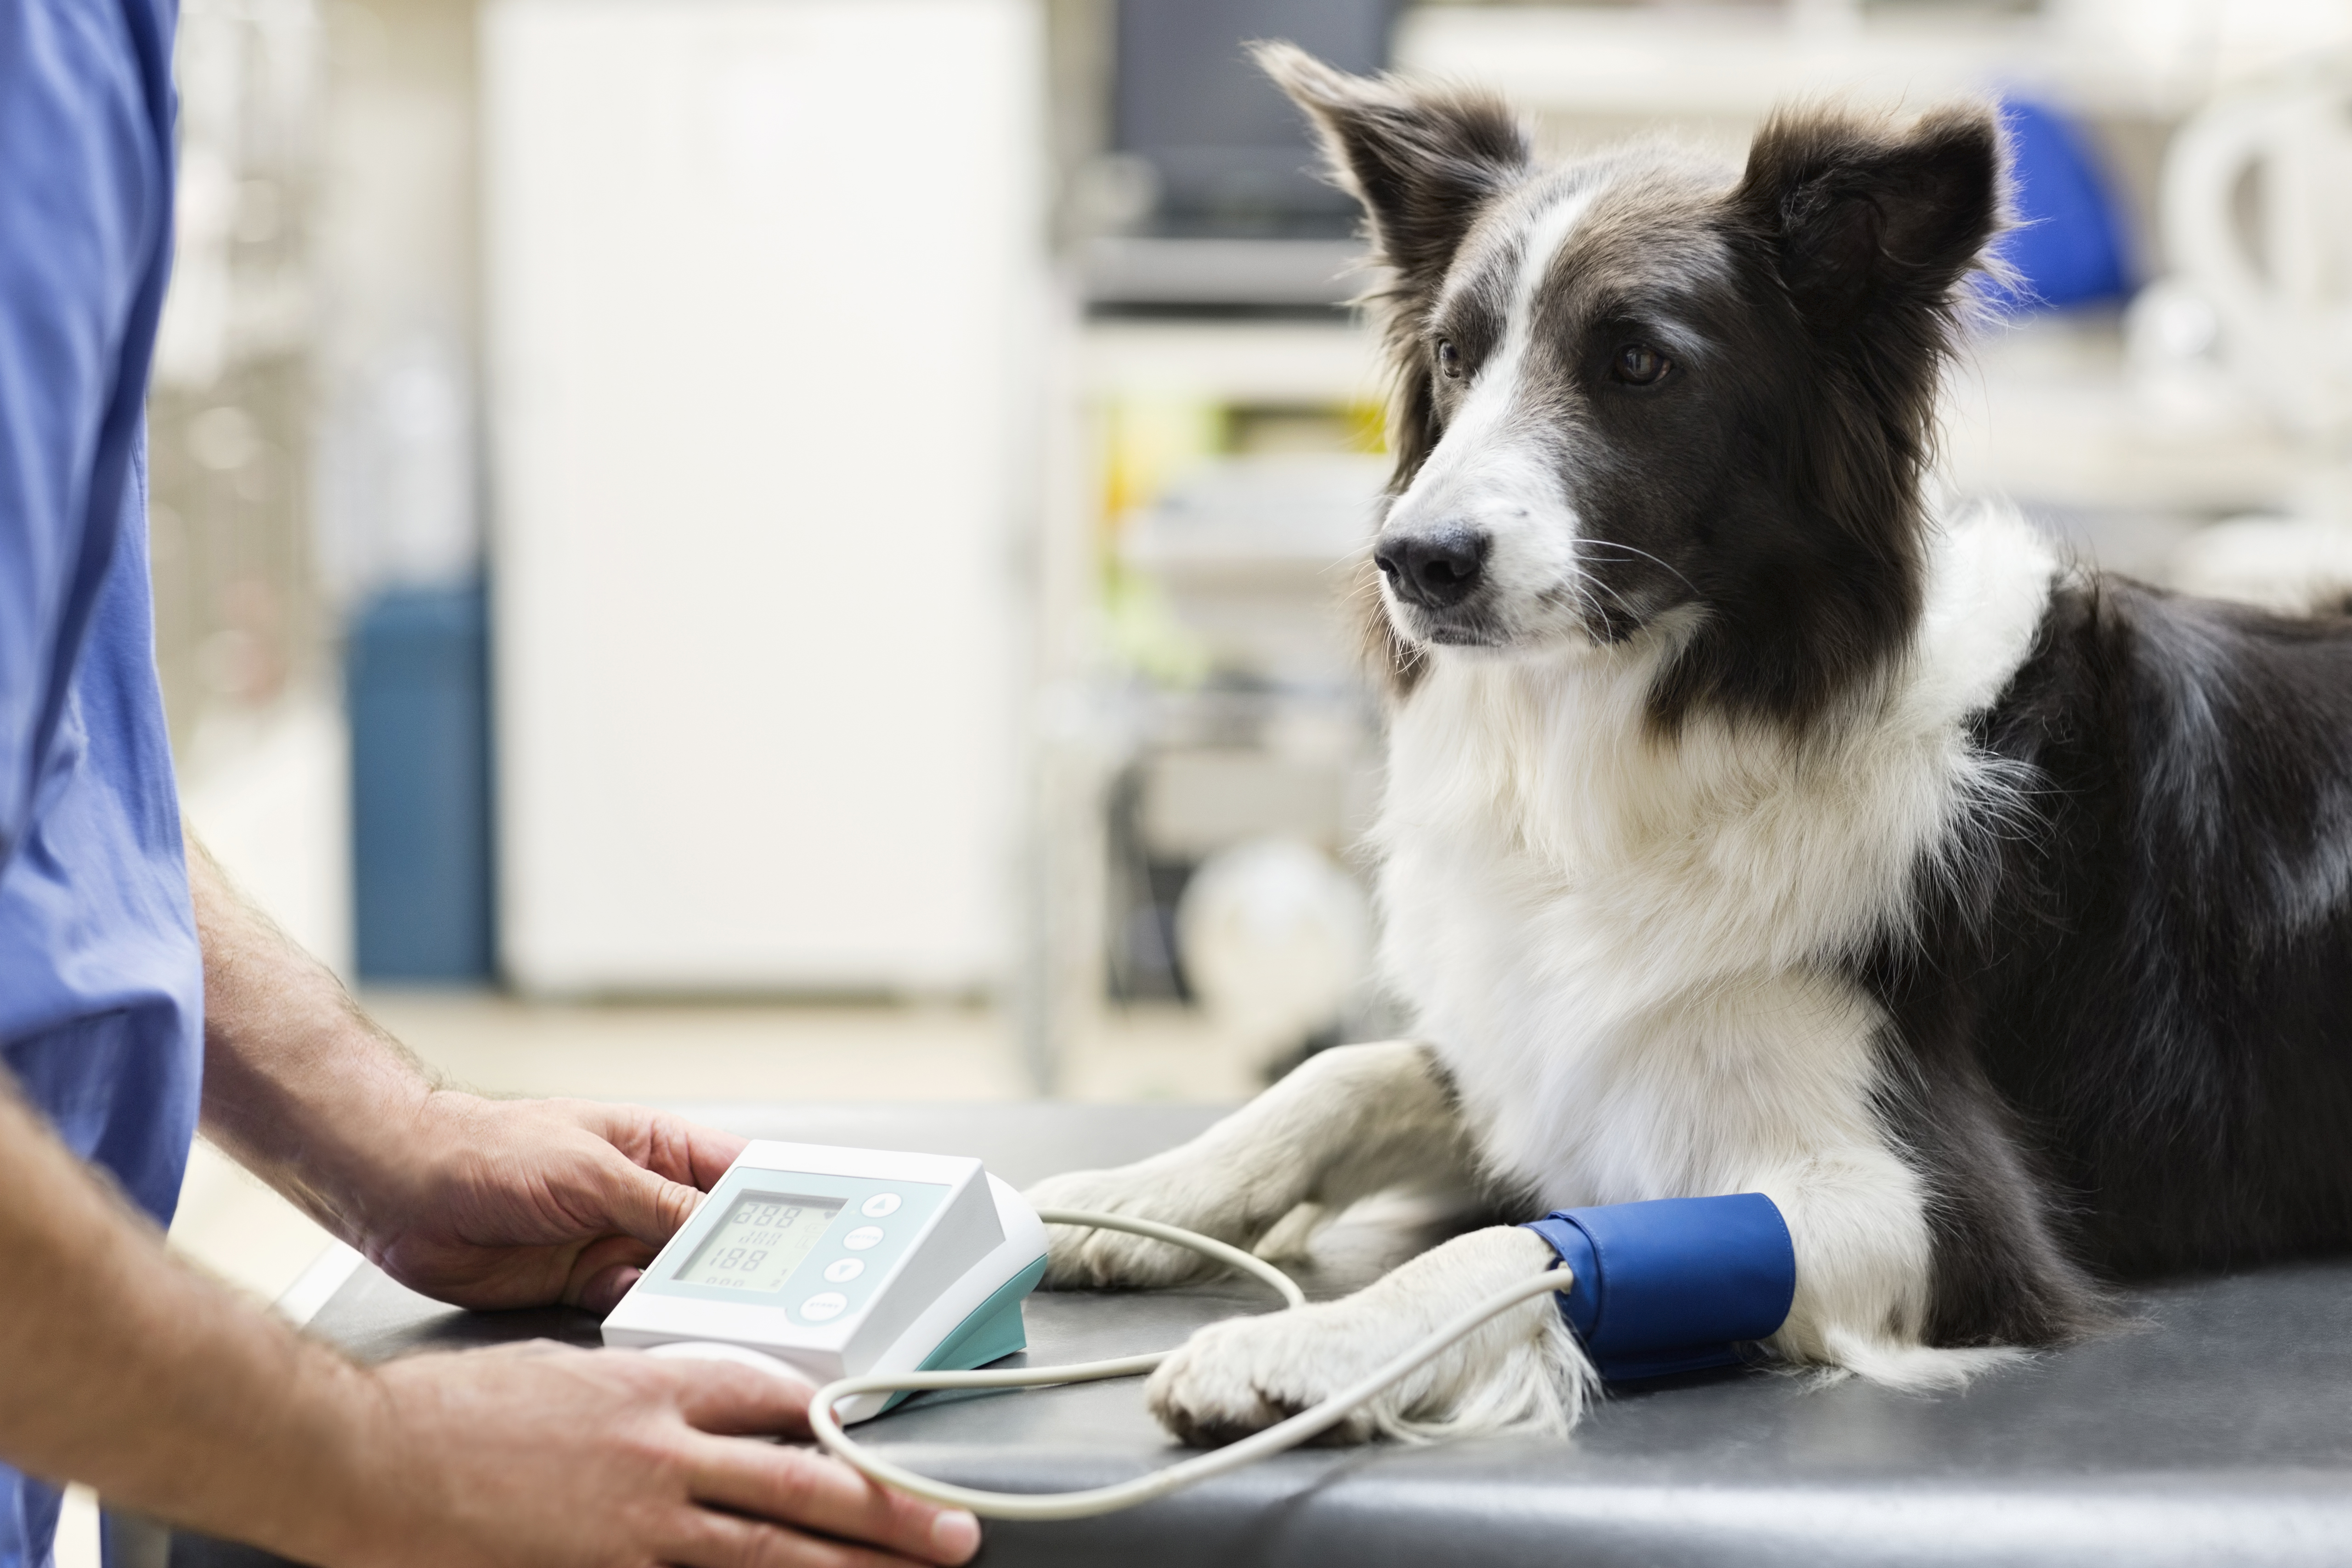 There's only one instance where you may not need to take your dog to the vet